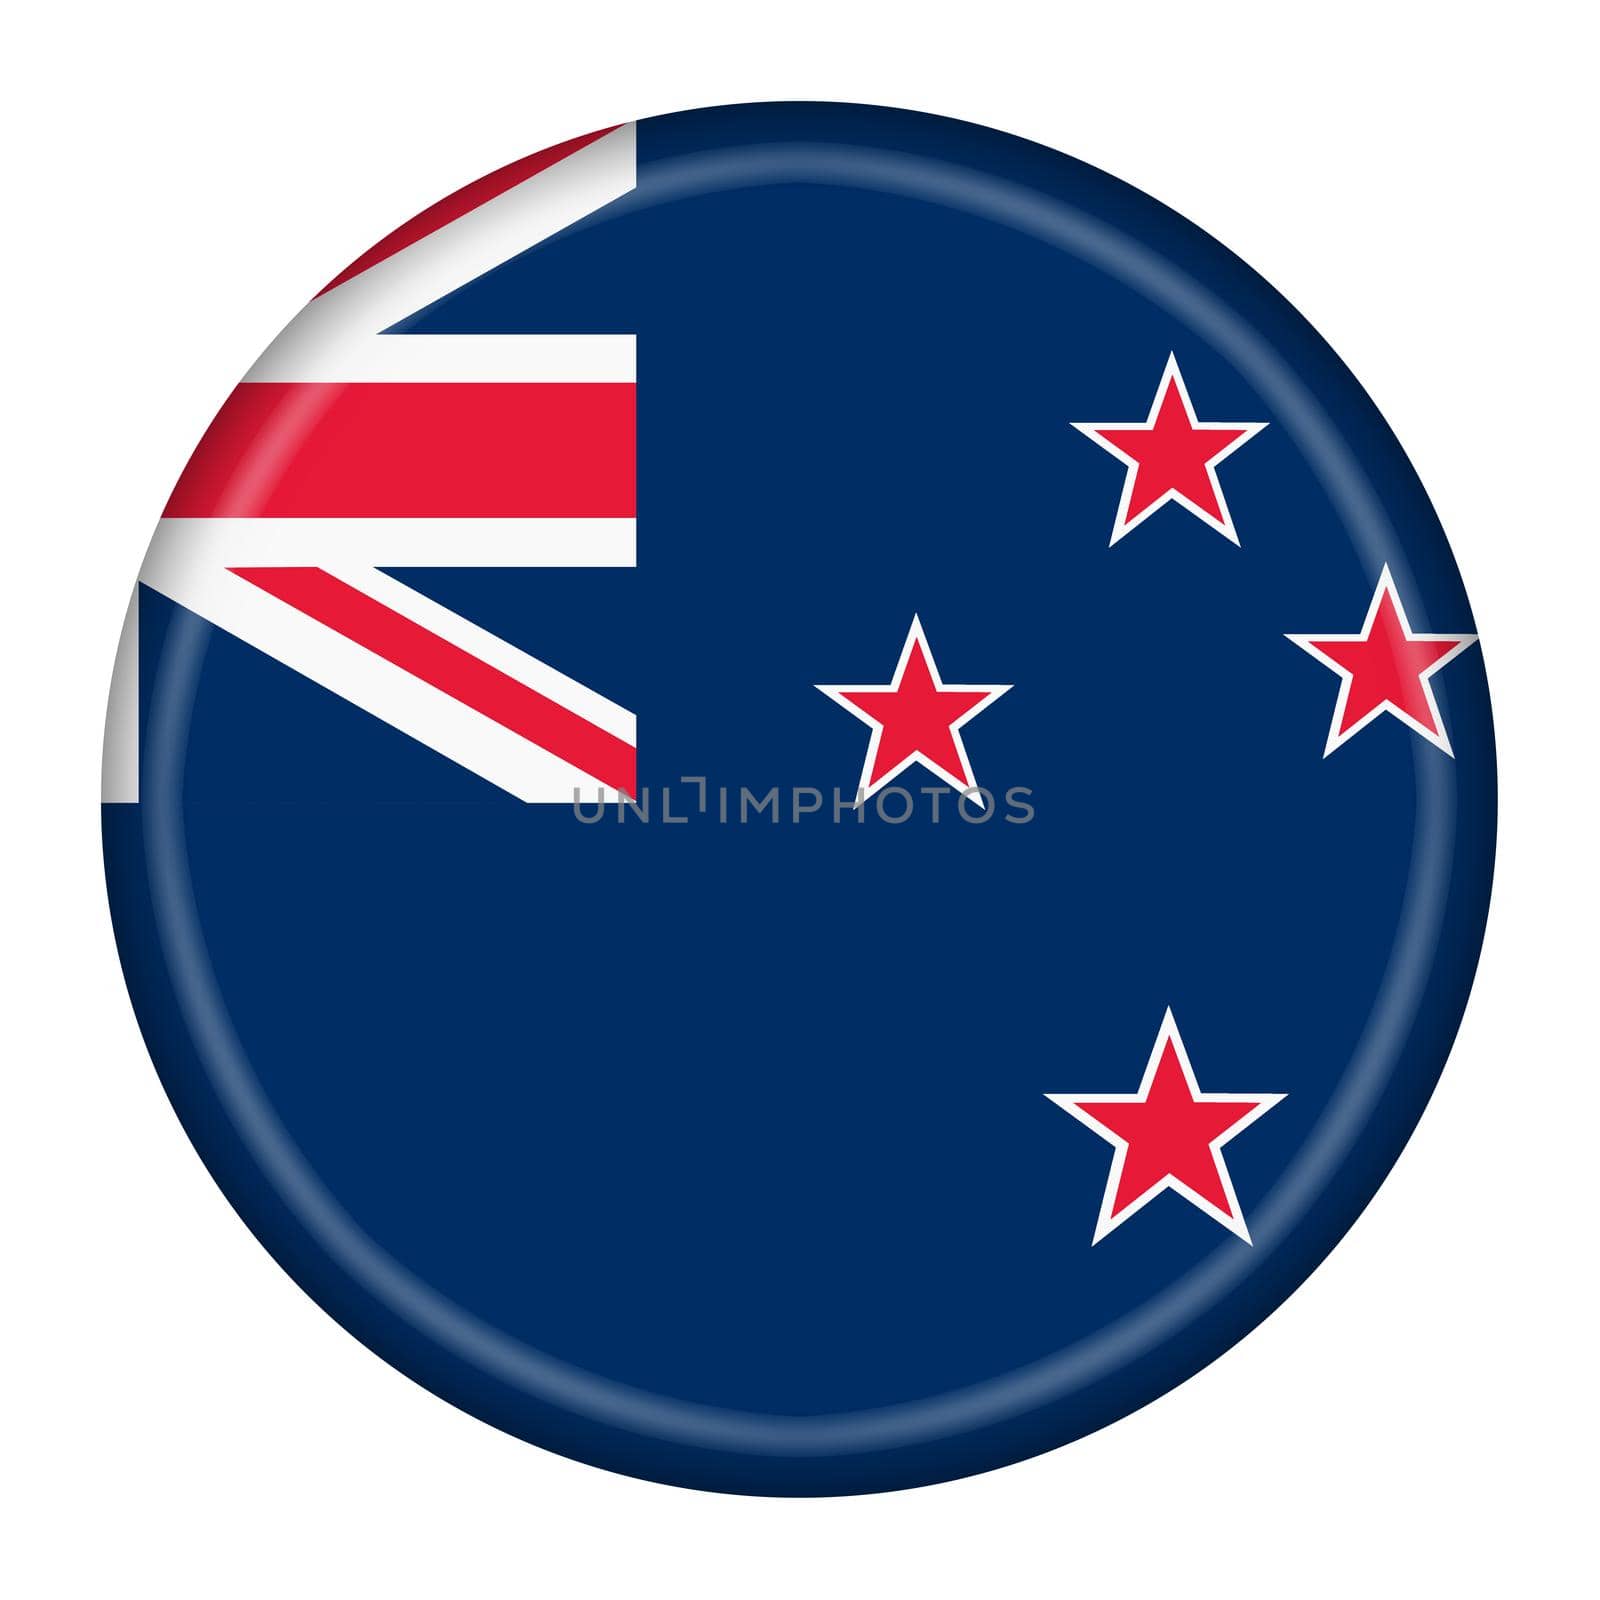 A New Zealand flag button 3d illustration with clipping path